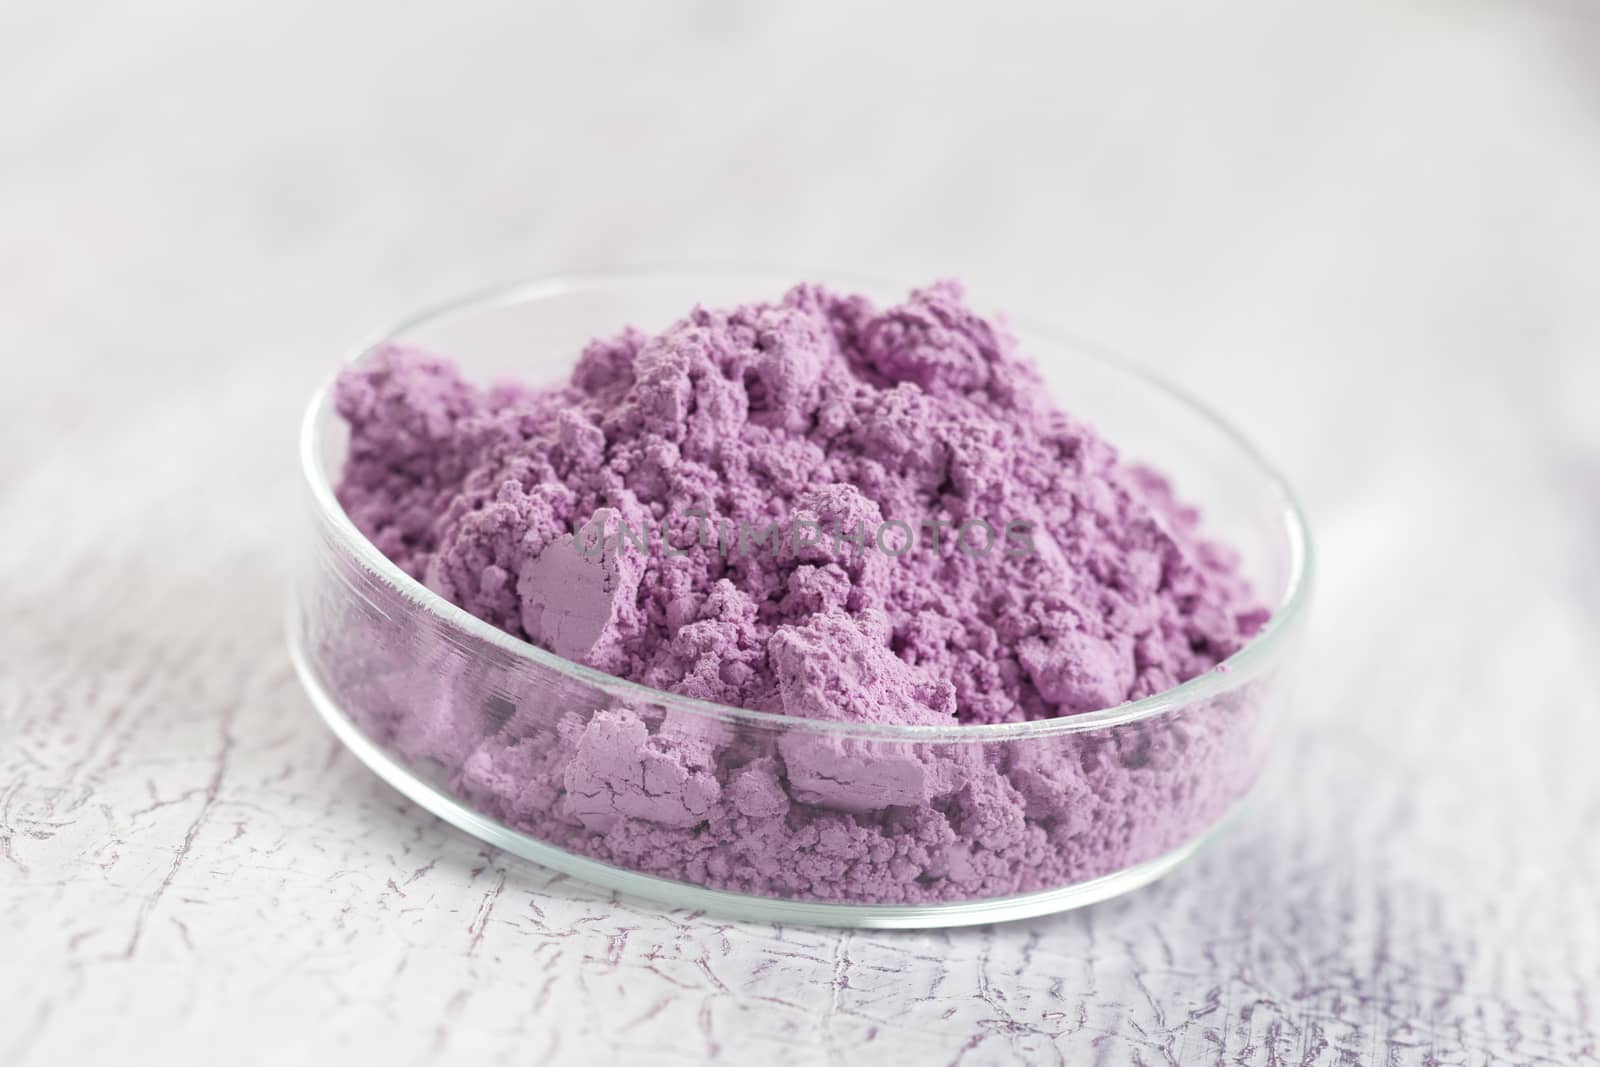 French purple clay Ready to be Used to Make Skin Treatment